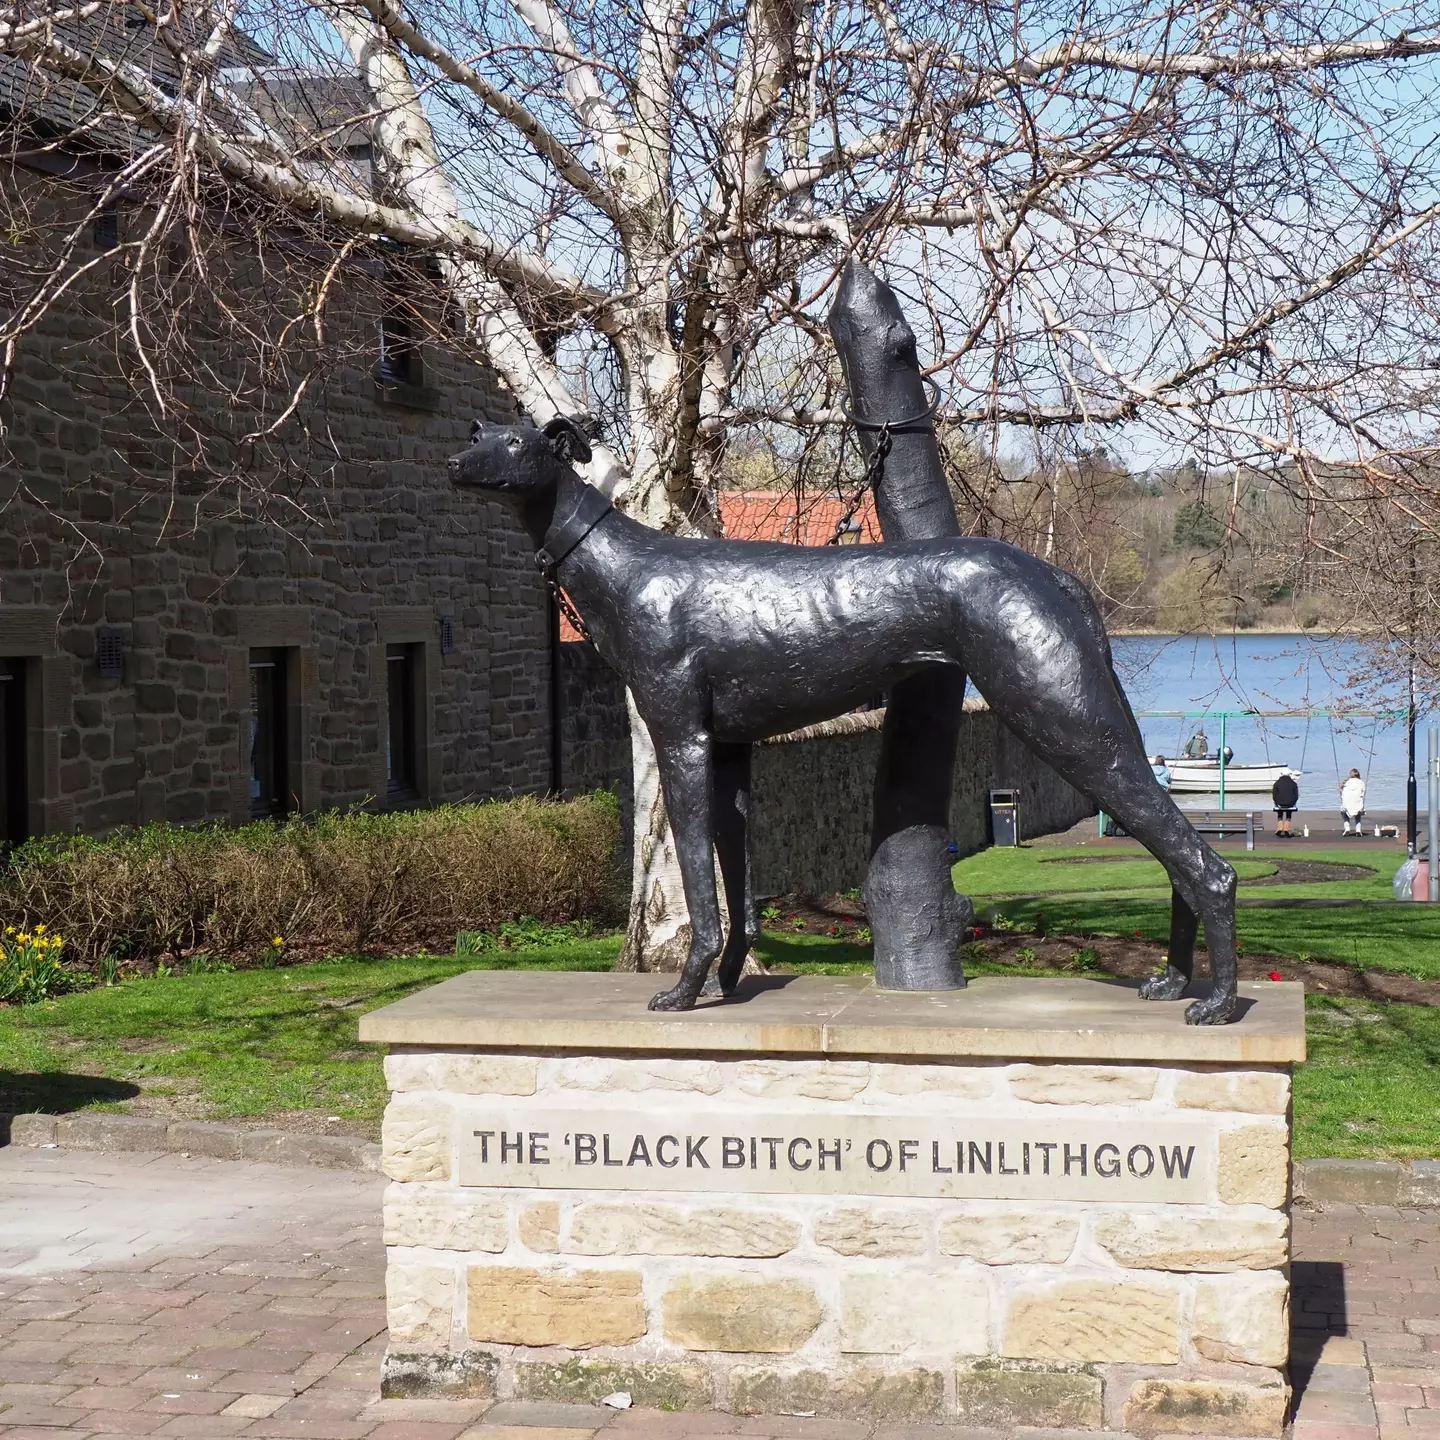 There's even a statue in Linlithgow to honour the history of the pub's name.